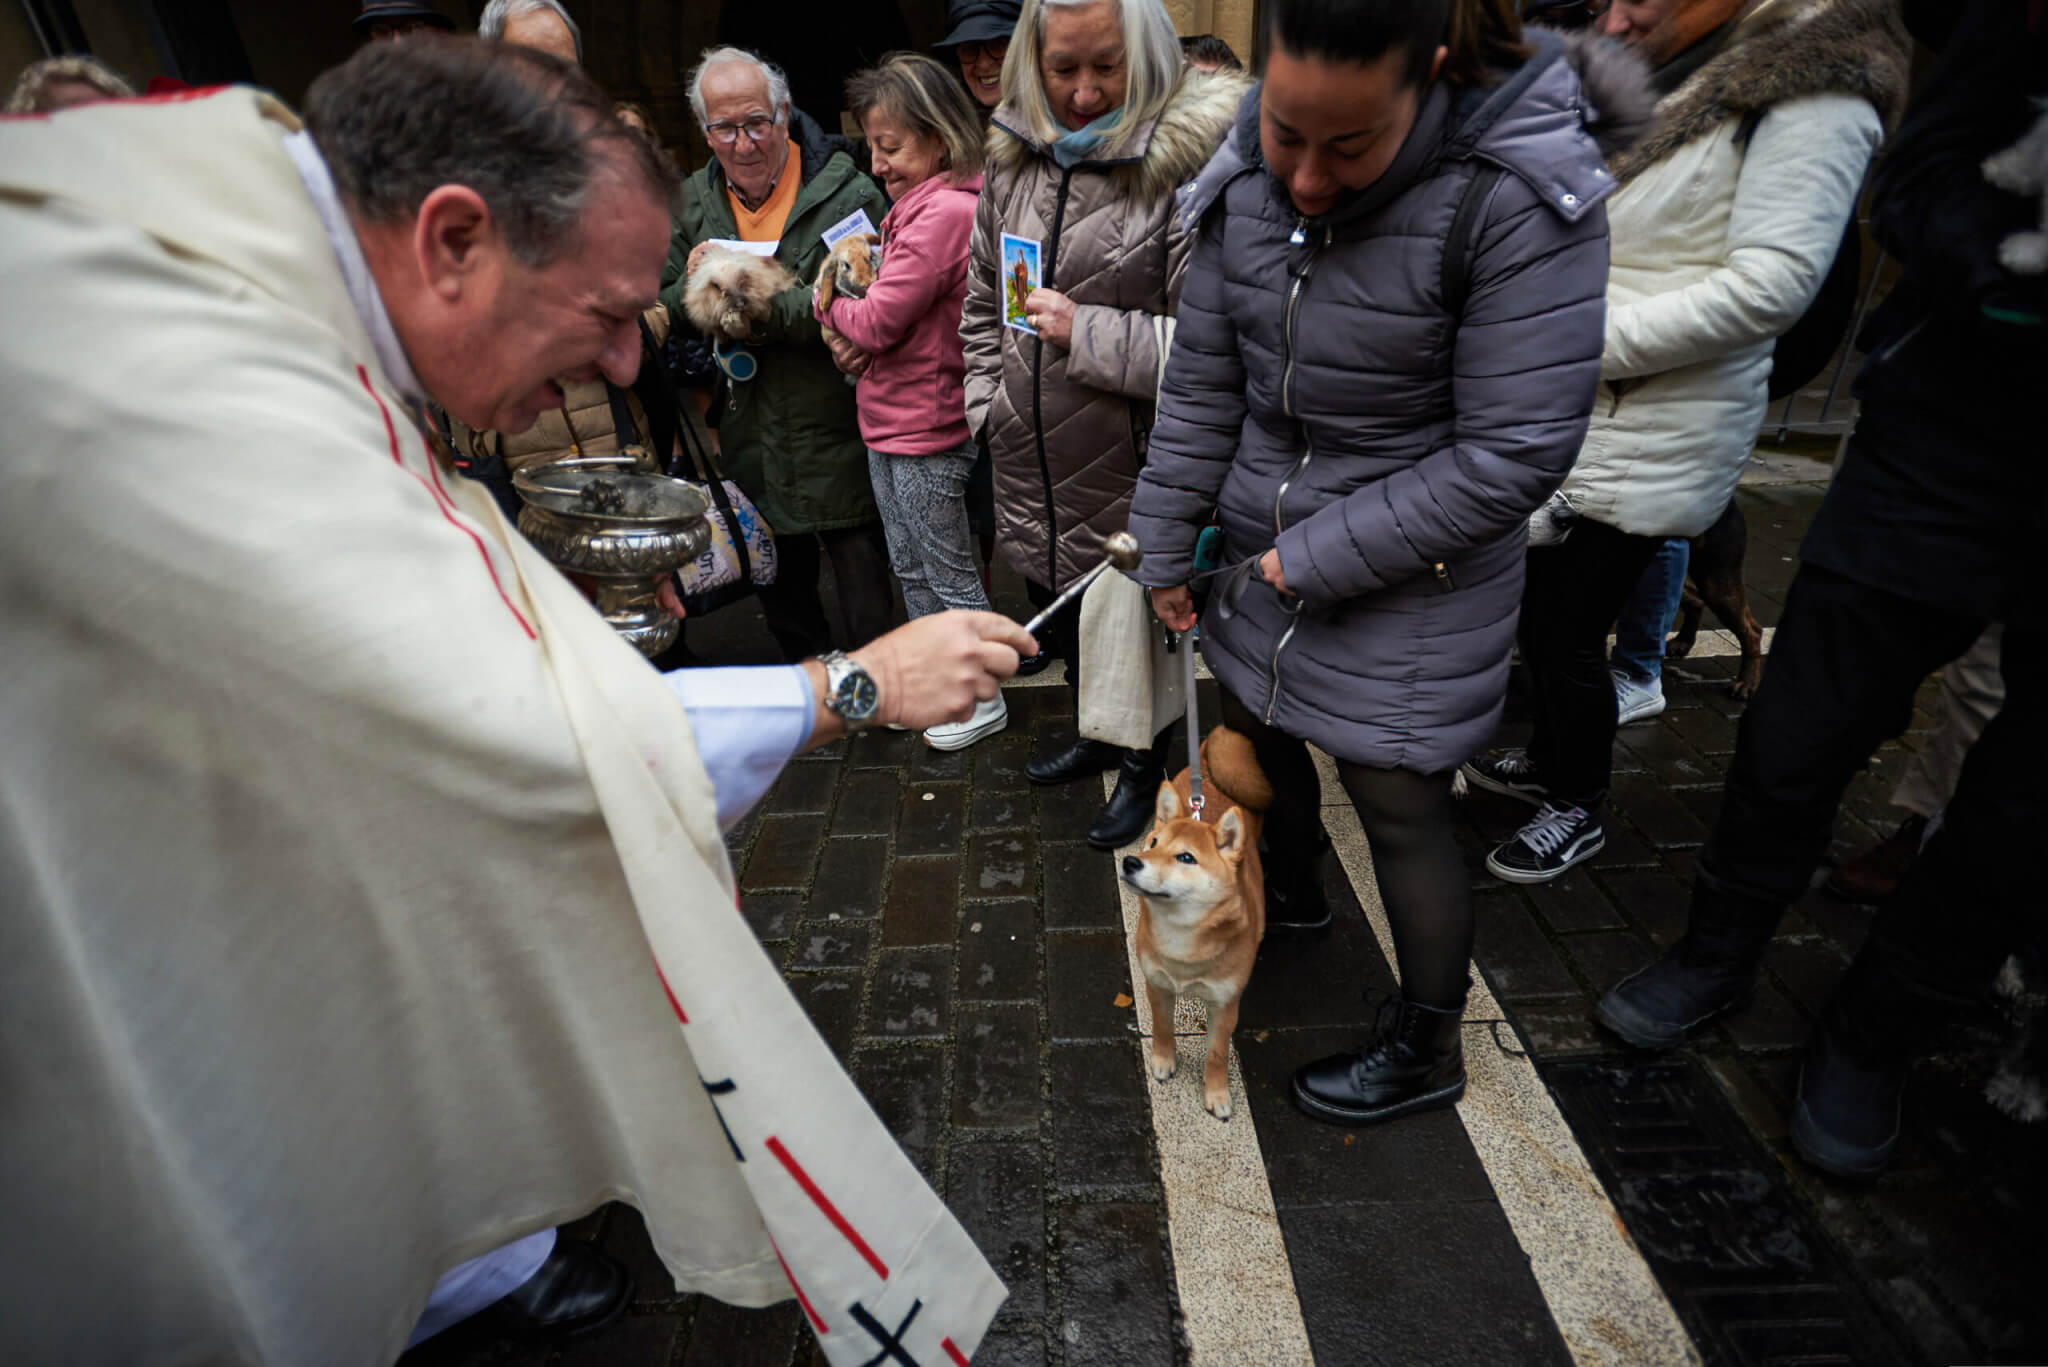 A dog of the Shiba Inu breed, has been blessed today by San Antón, patron saint of animals in Pamplona.